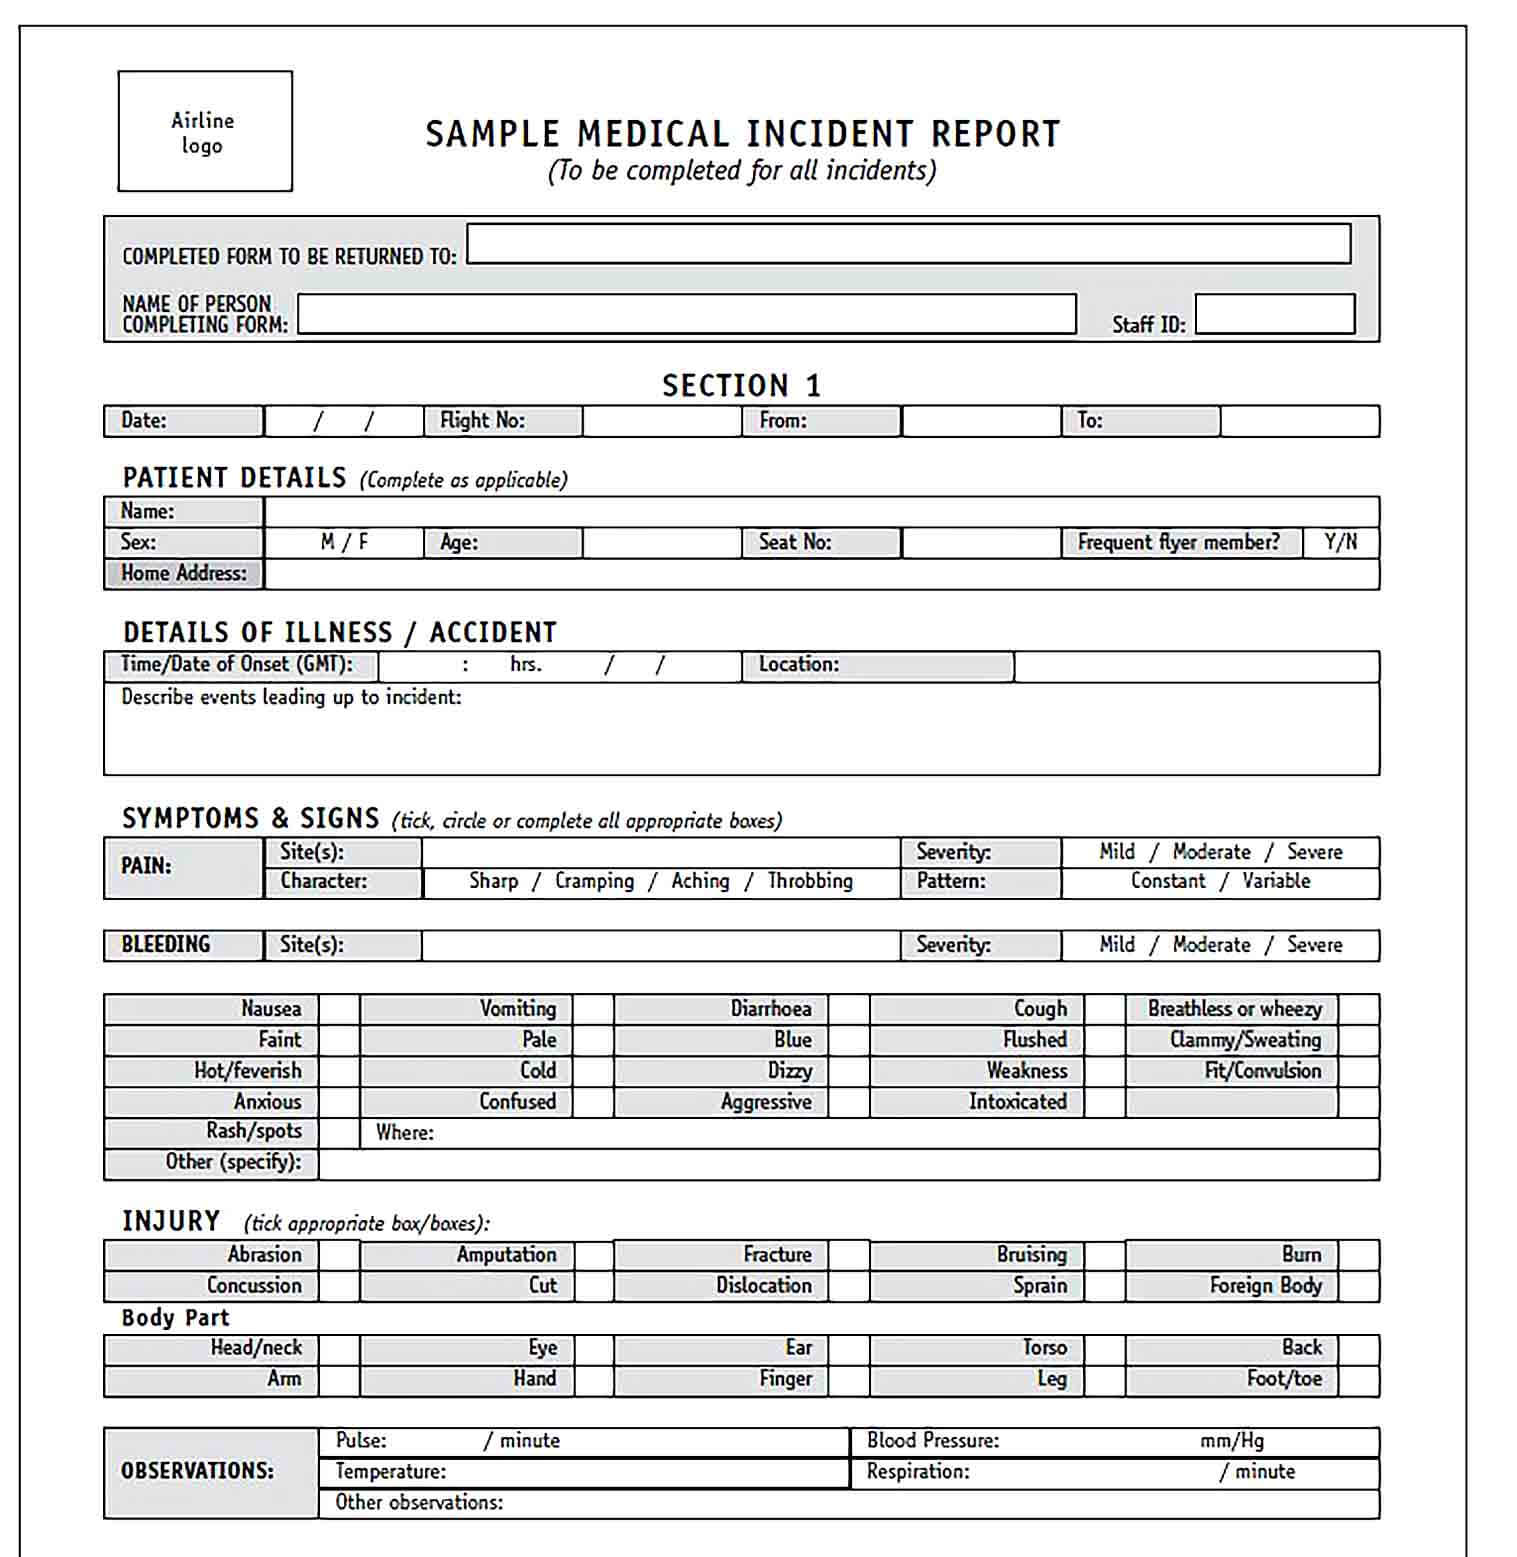 Sample Medical Incident Report Form Template in PDF